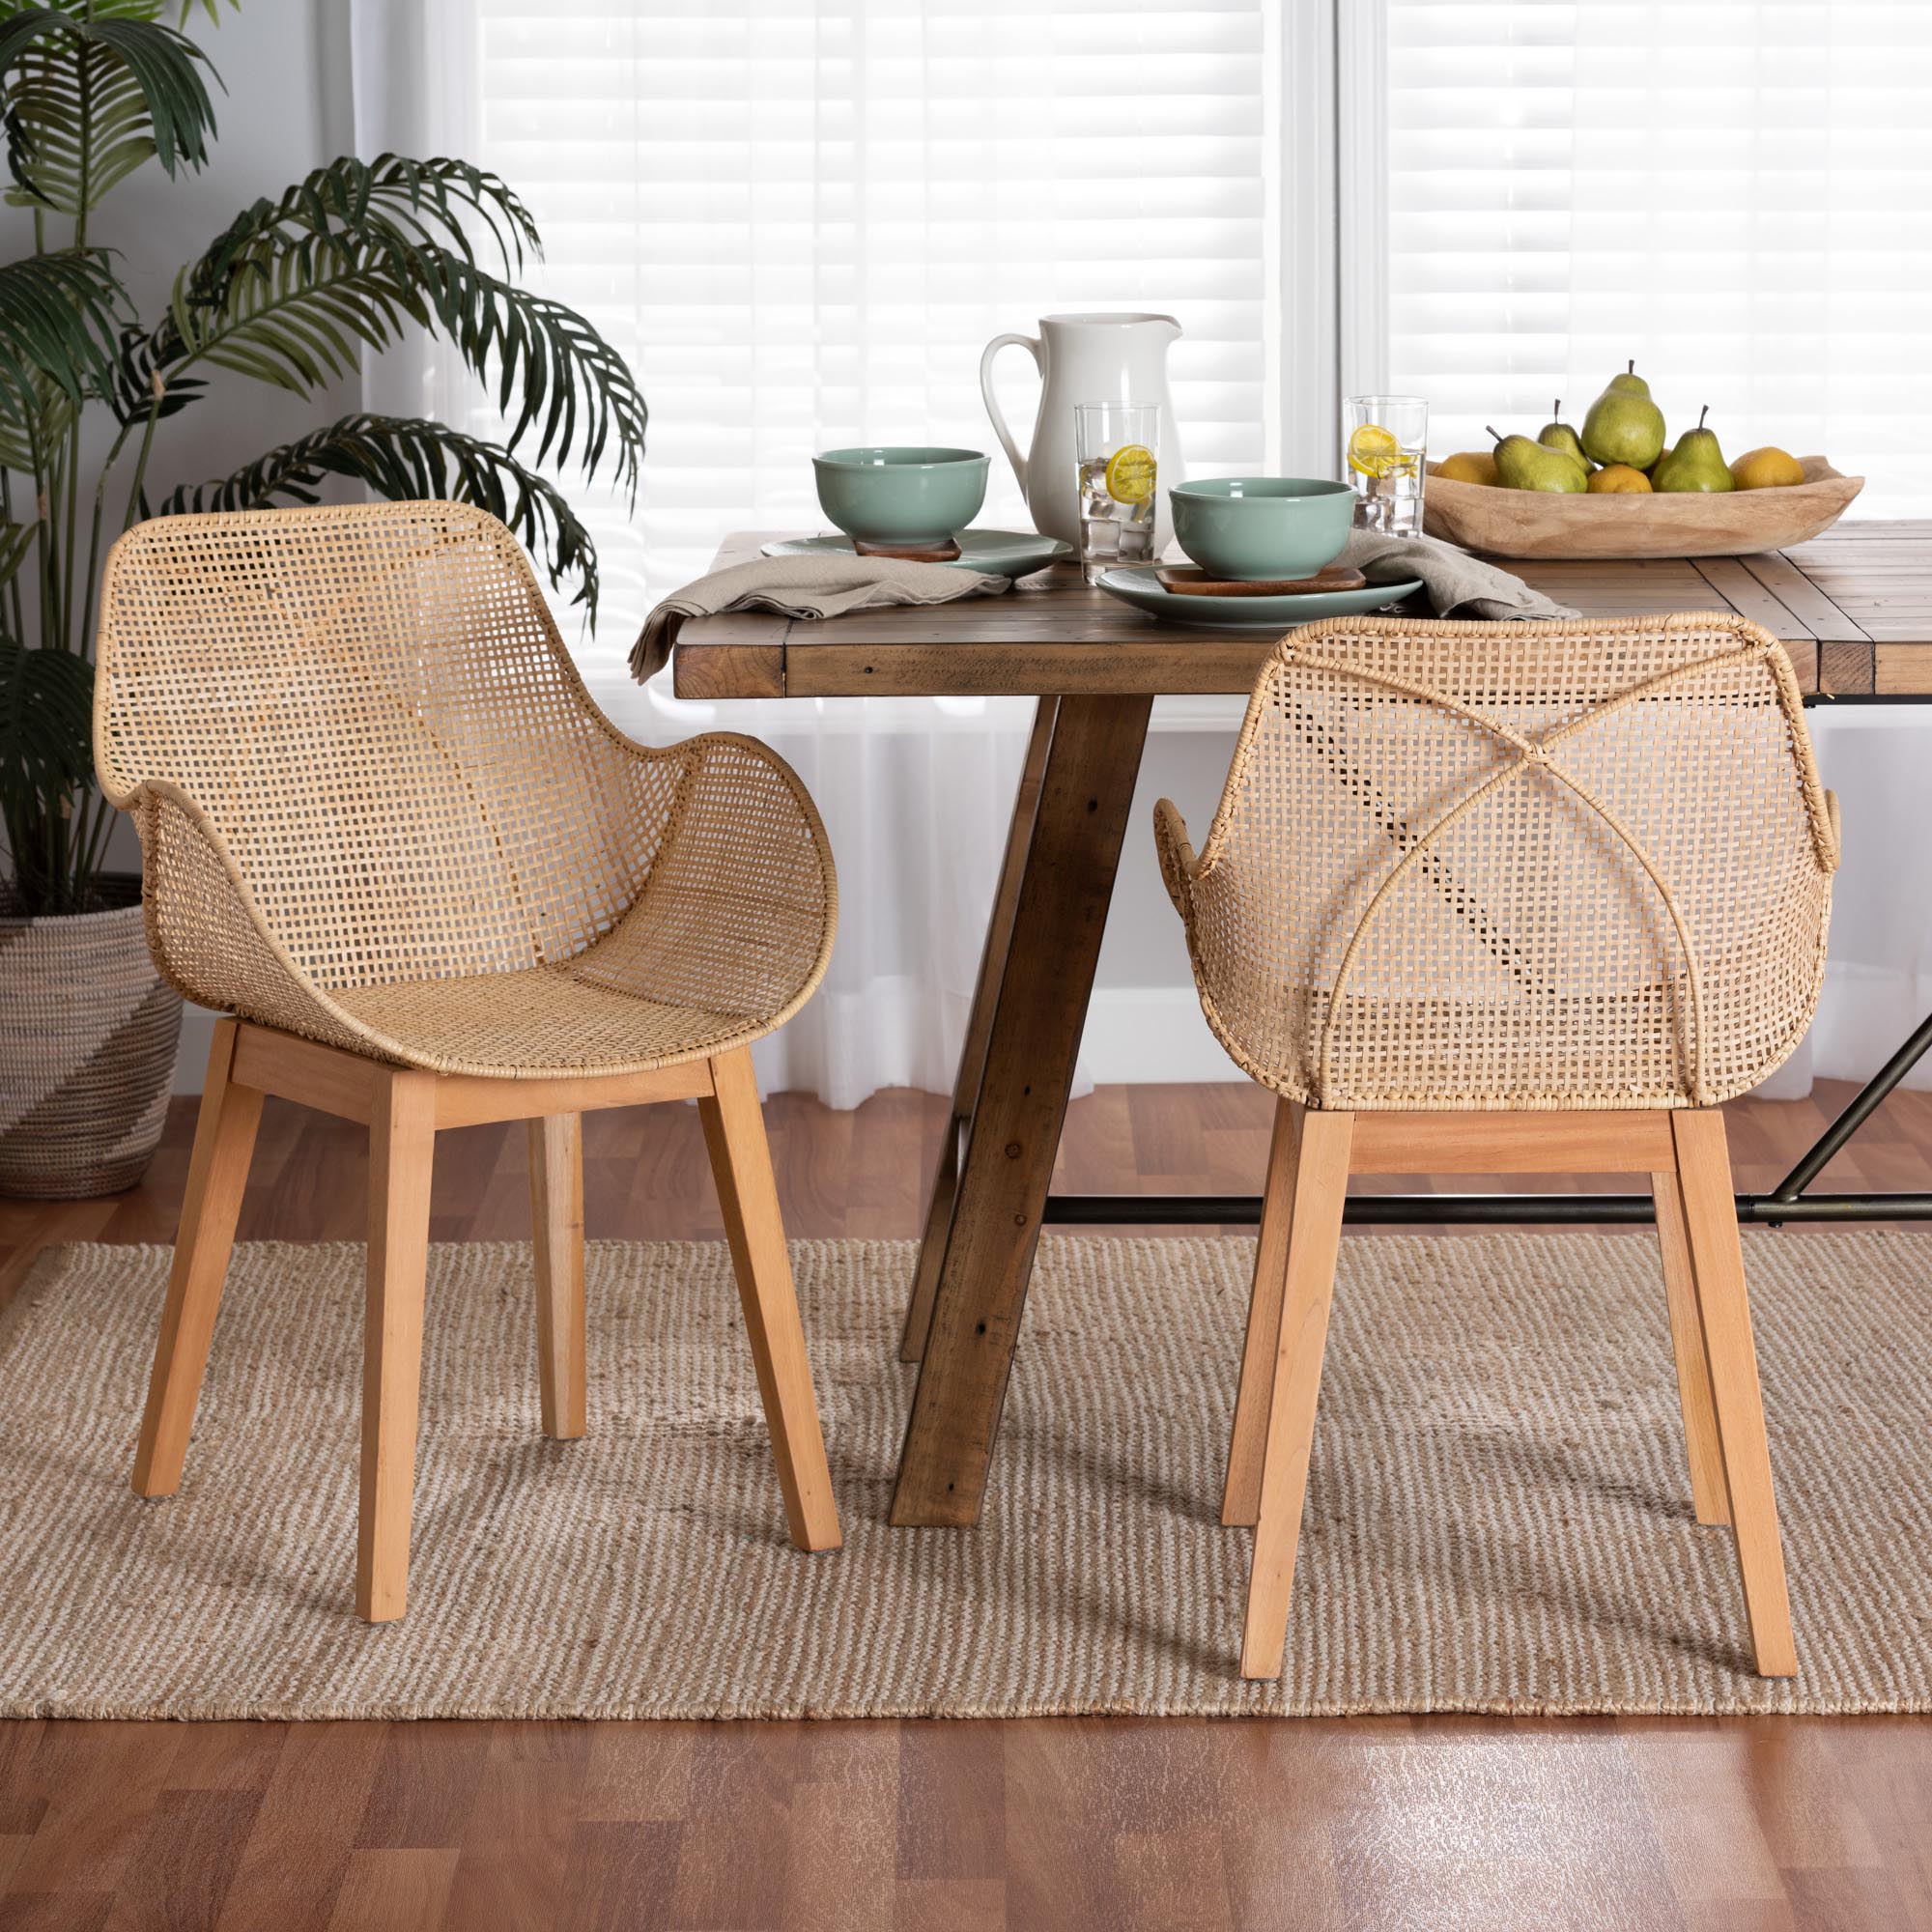 Ertis Wing Dining Chair Natural Rattan (Set of 2)